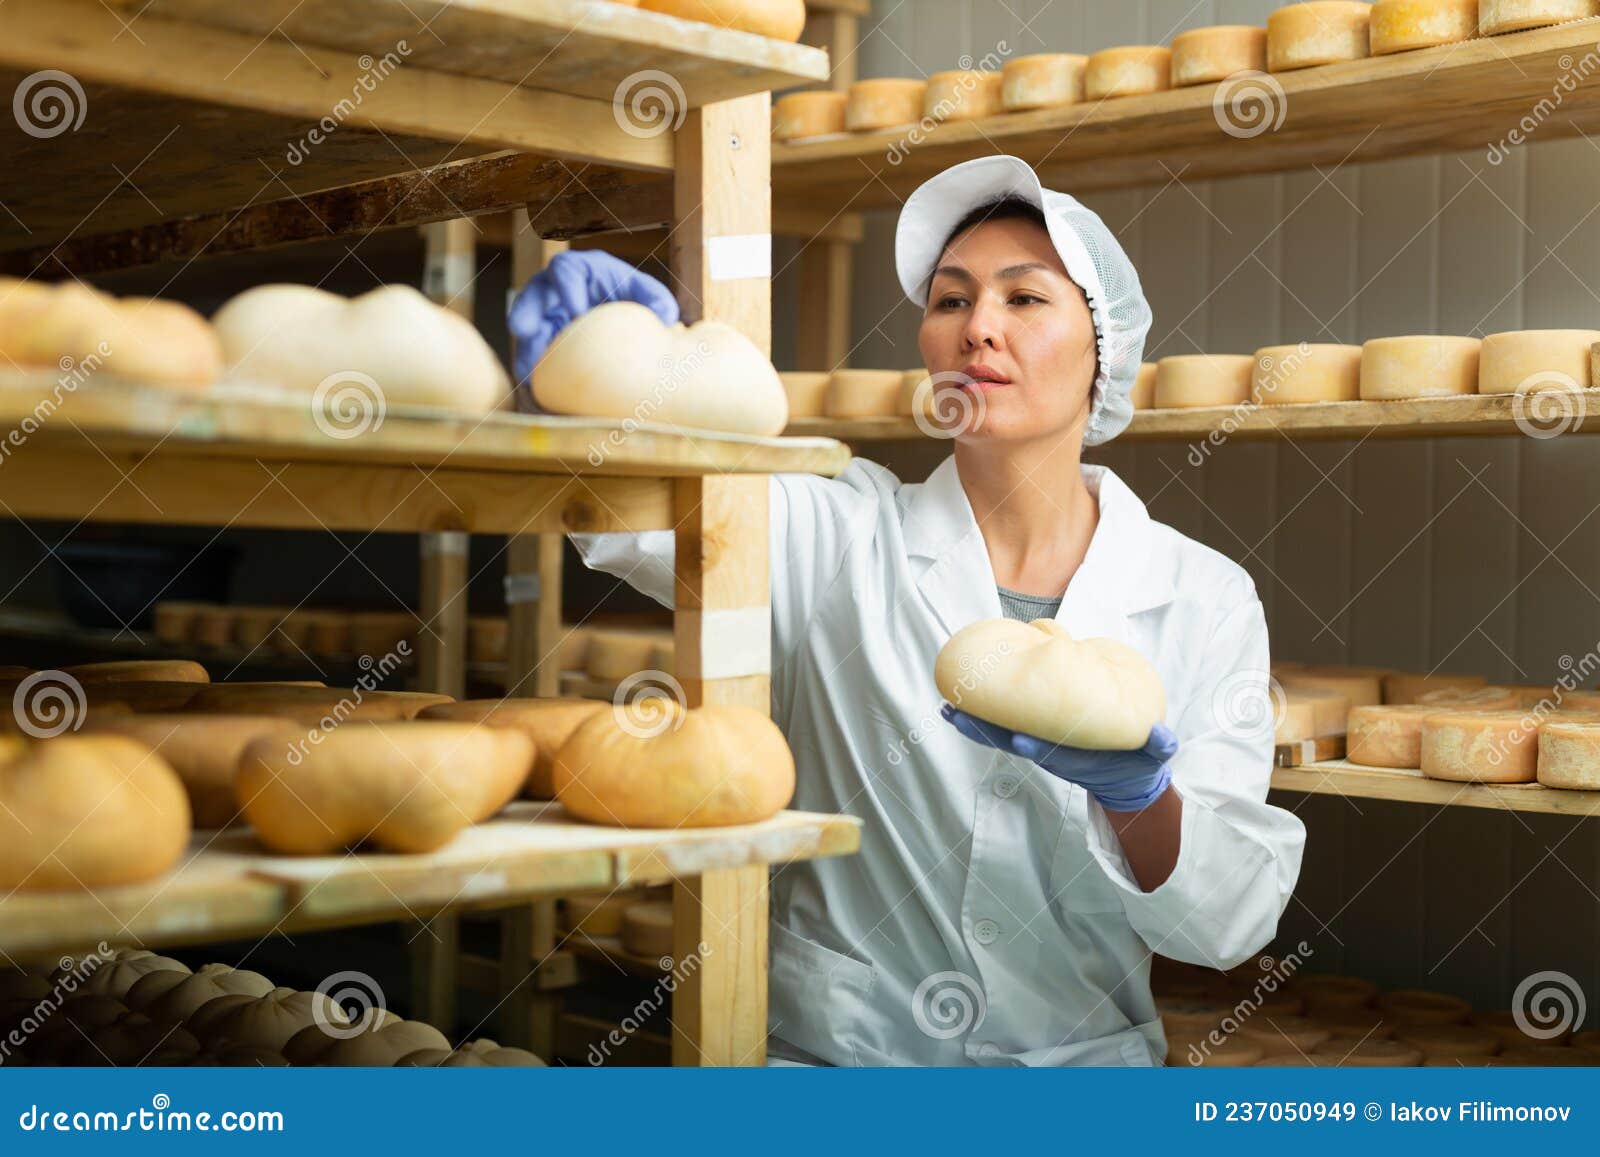 https://thumbs.dreamstime.com/z/skilled-woman-controlling-maturing-process-cheese-wheels-portrait-asian-working-storehouse-factory-goat-placed-shelves-237050949.jpg